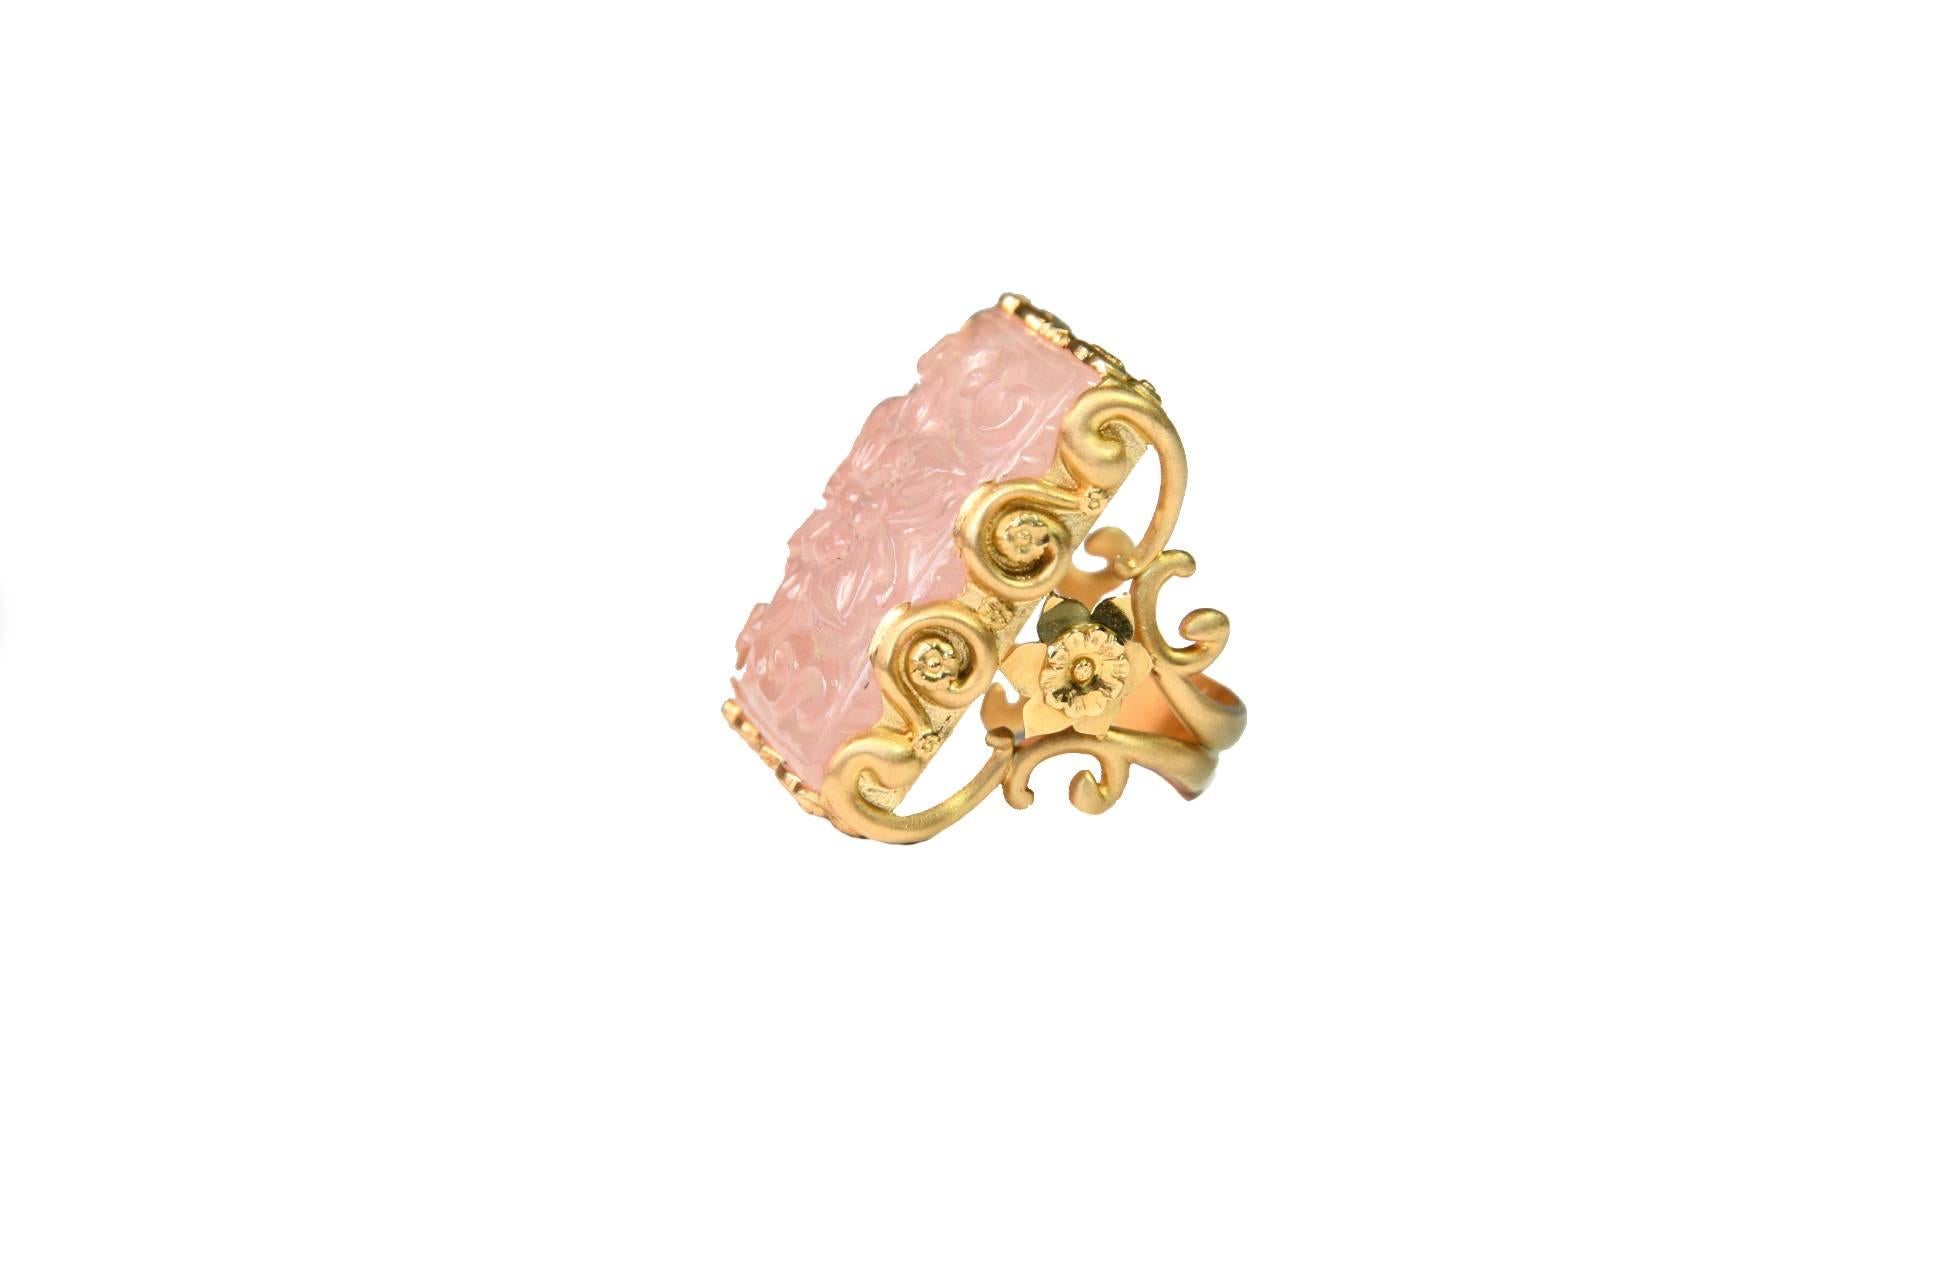 Fine carved gold ring with a rose quartz square carved both side, all the decoration in gold  is made by hand and reproduce flowers and naturalistic design. 18kt gold gr 13,10.
All Giulia Colussi jewelry is new and has never been previously owned or